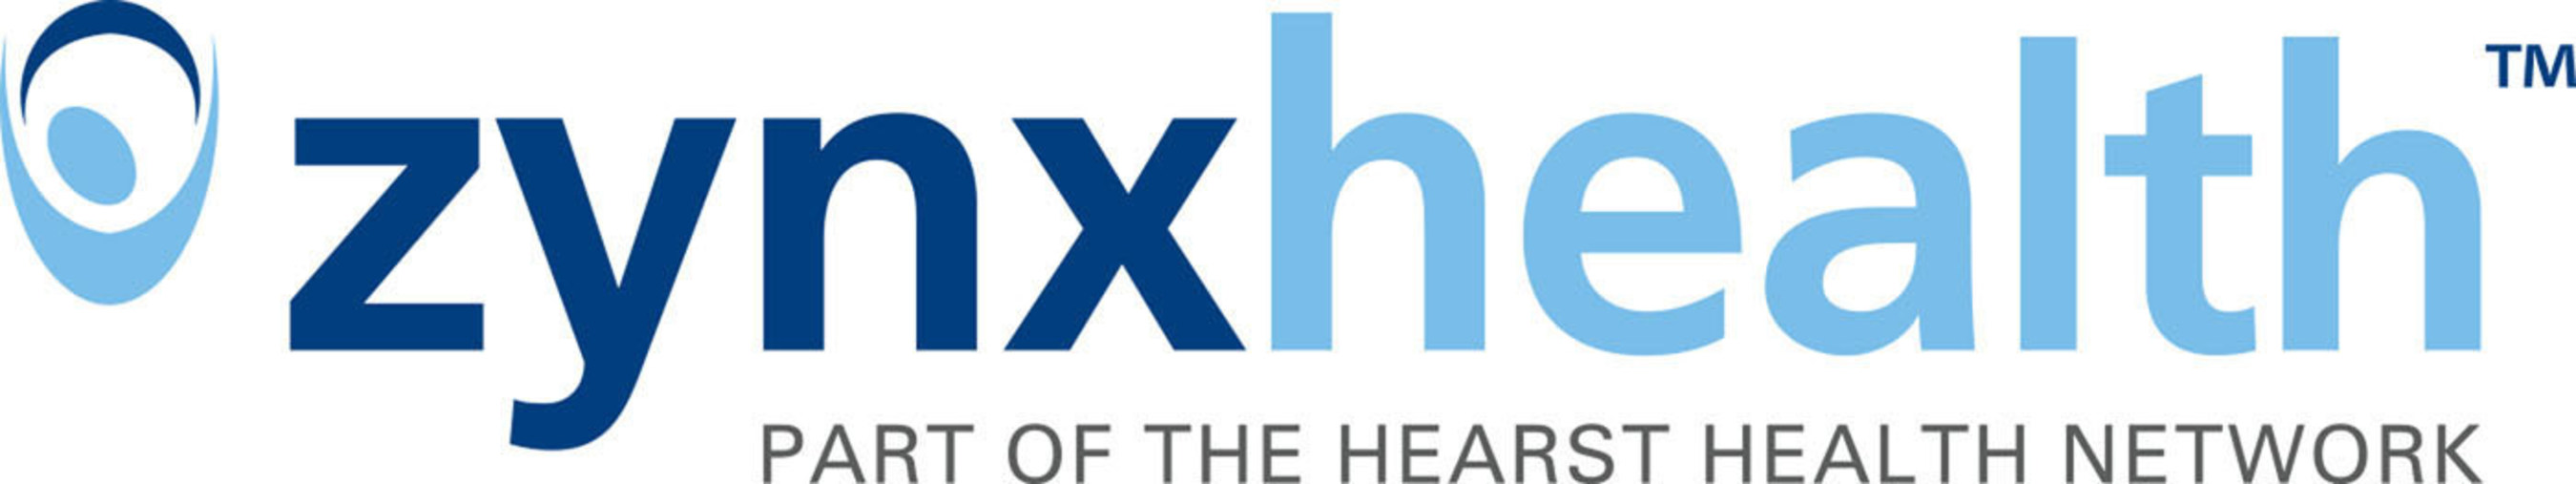 Zynx Health, part of the Hearst Health network, is the pioneer and market leader in evidence-based clinical improvement and mobile care solutions that provide the care guidance to enhance quality, improve care coordination, and decrease variation across an individual's health journey. With Zynx Health, healthcare organizations exceed industry demands for delivering high-quality care at lower costs. Zynx Health partners with healthcare organizations to continuously and measurably improve care.